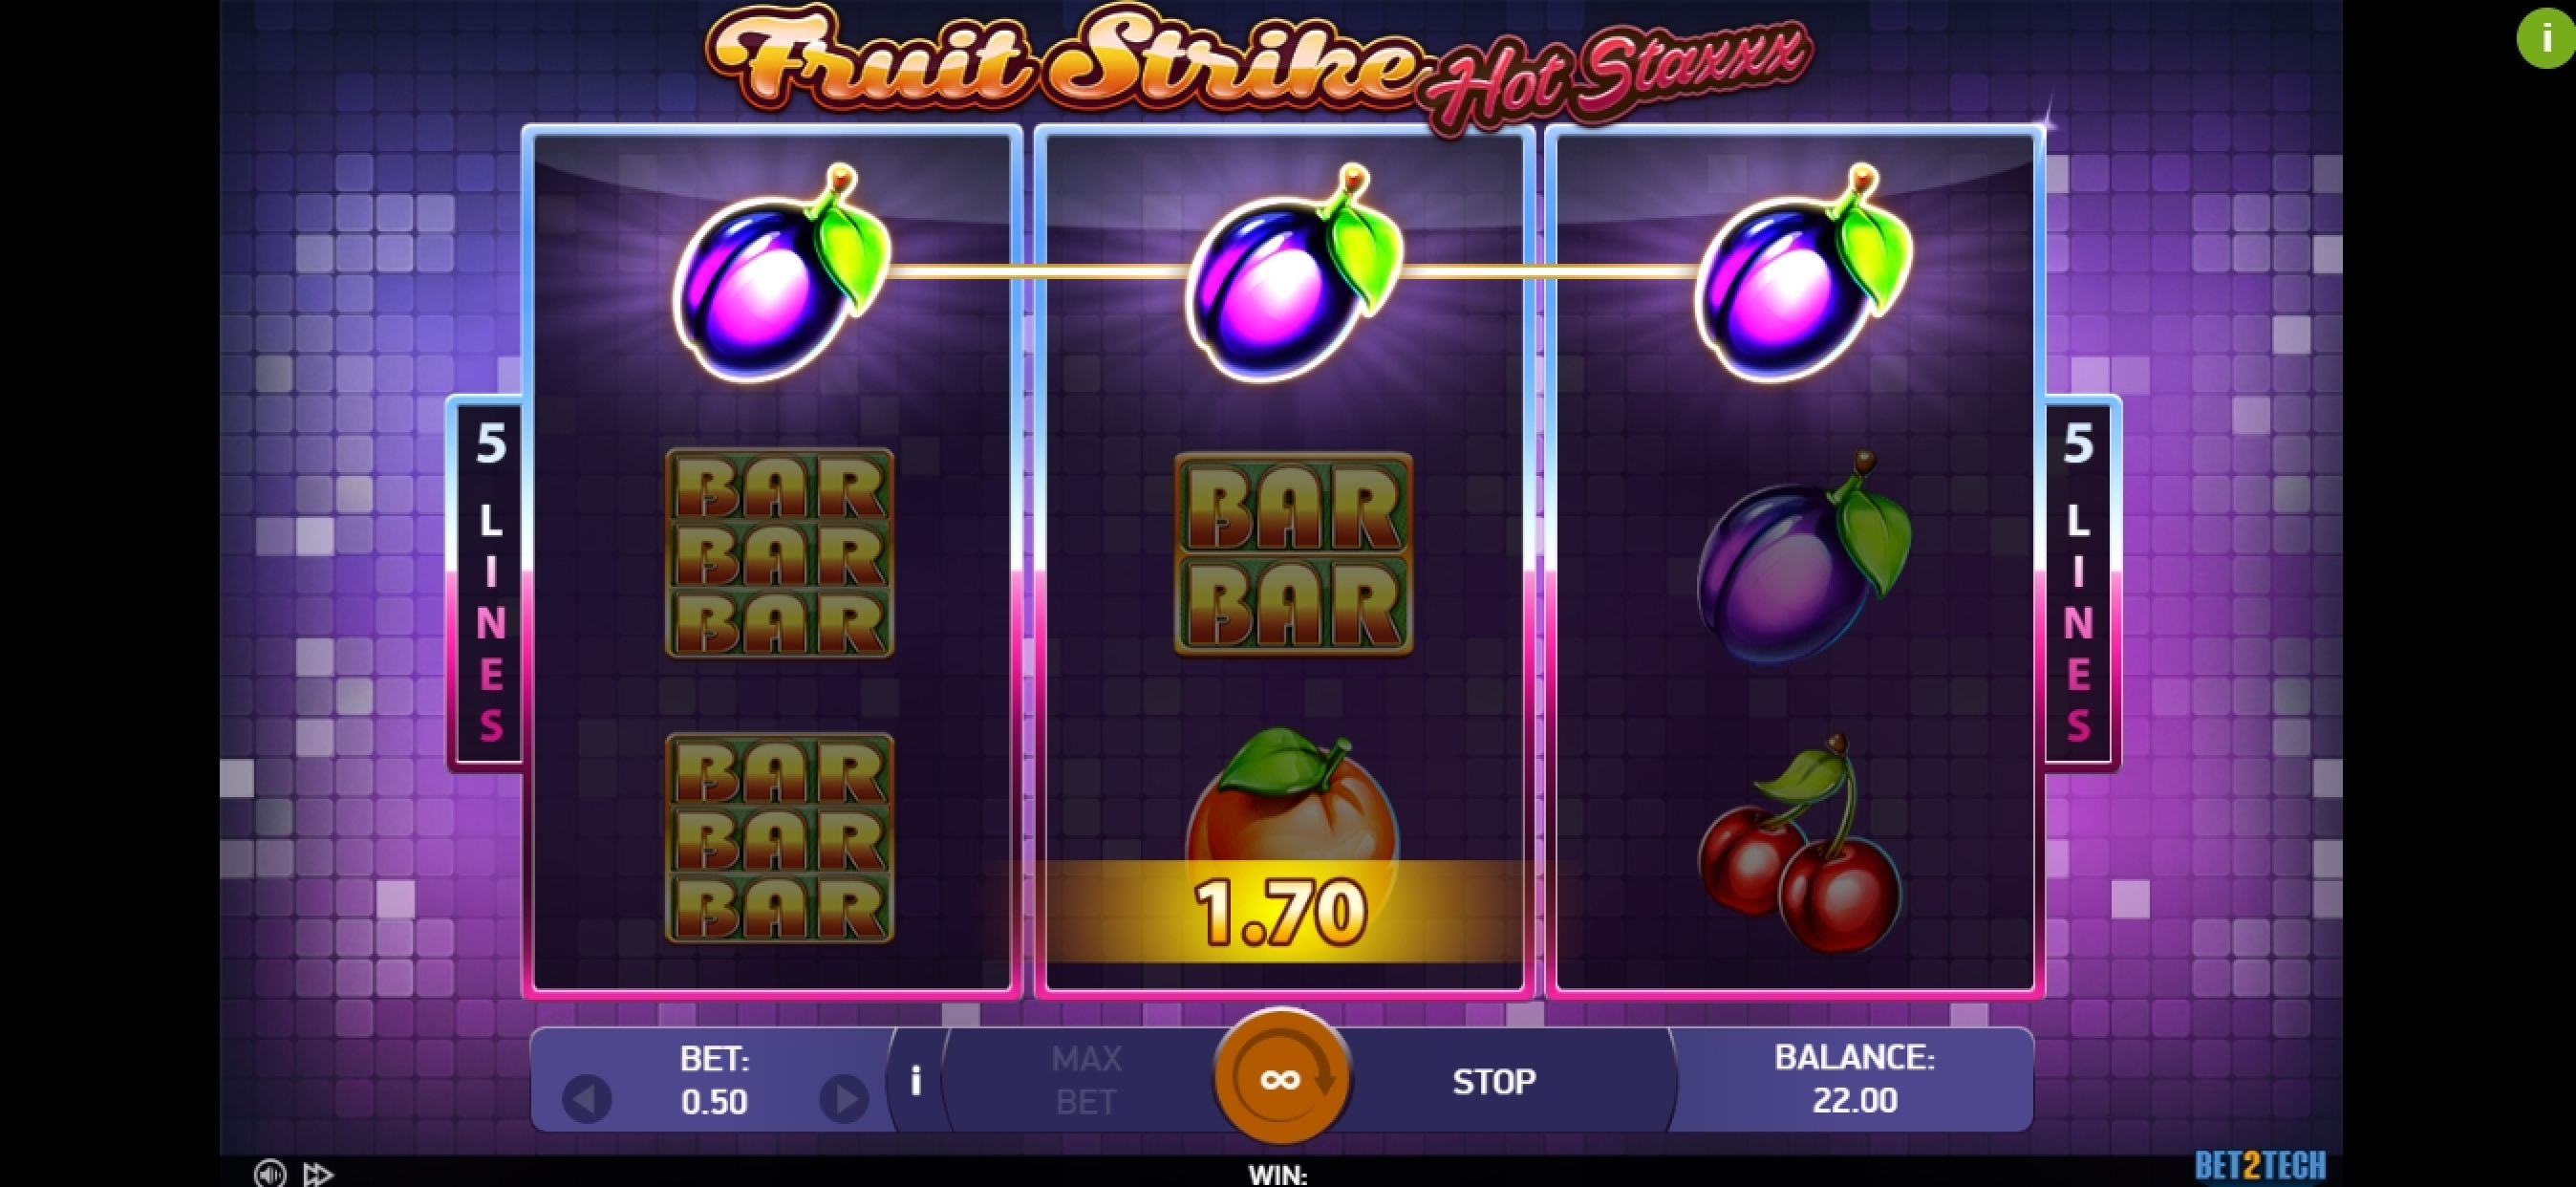 Win Money in Fruit Strike: Hot Staxxx Free Slot Game by Bet2Tech